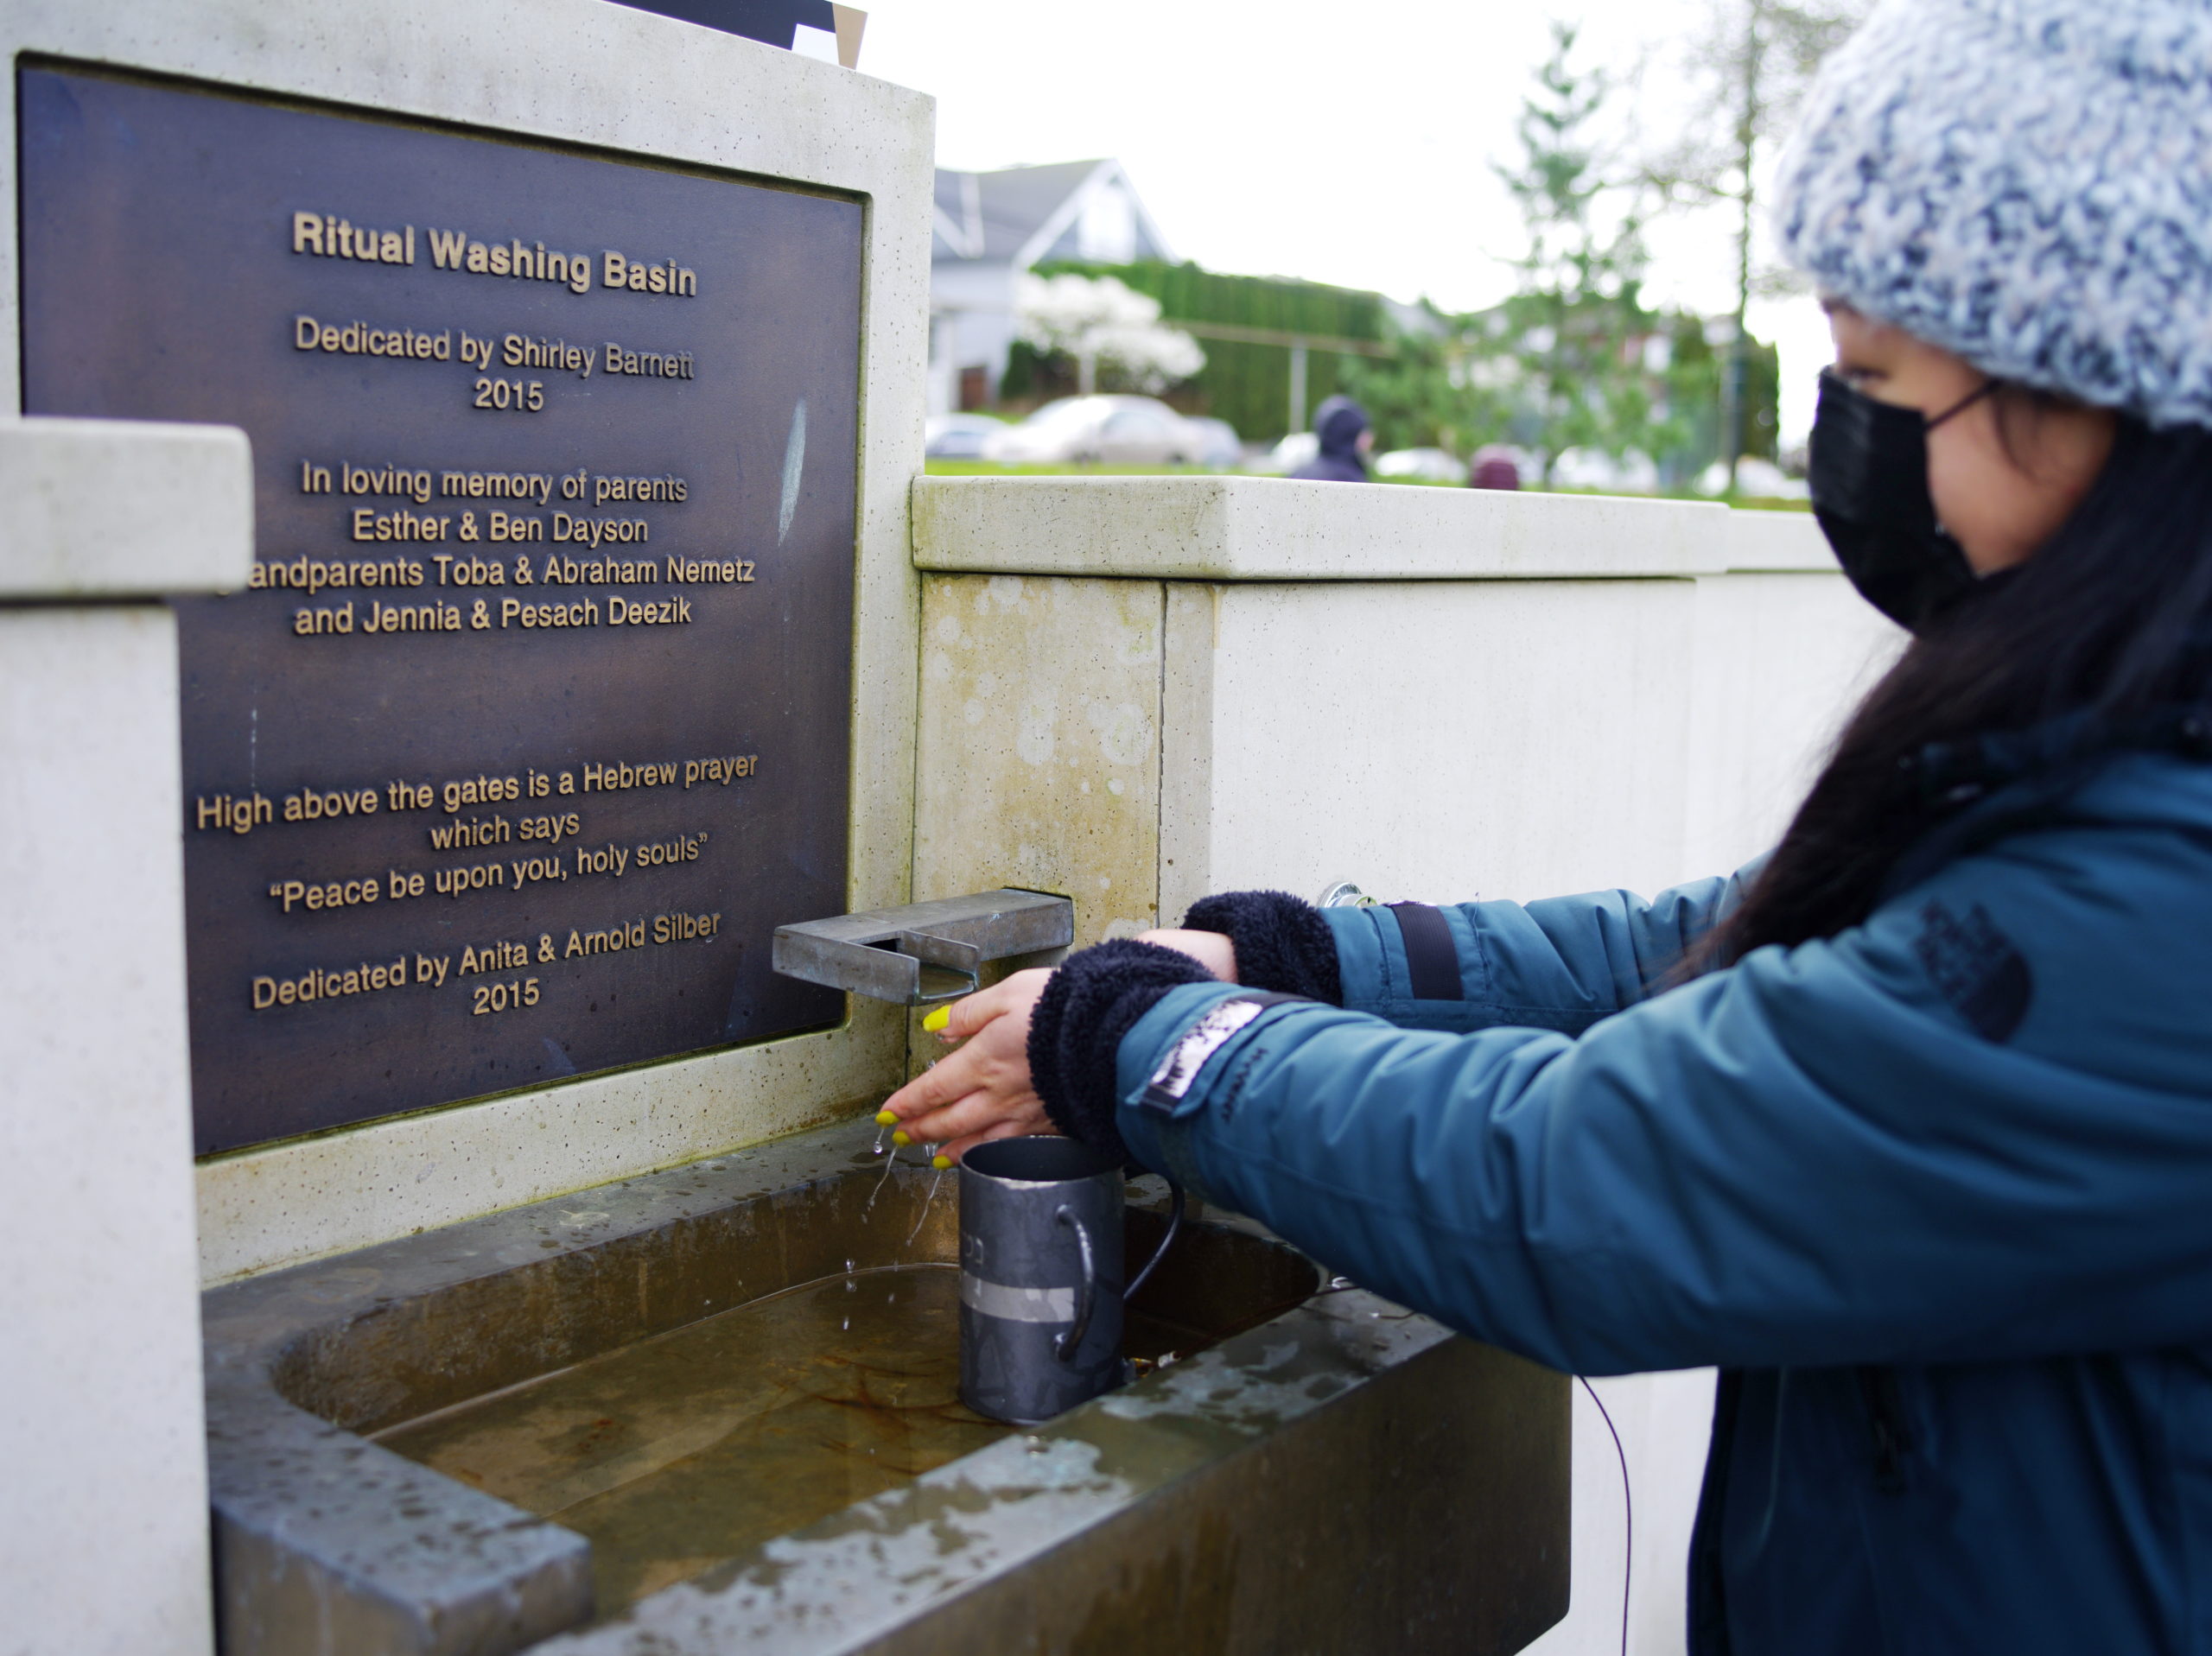 Image Description: A person wearing a heavy winter coat washes their hands in the Ritual Washing Basin. Their long dark hair falls over their left shoulder. They have on a knitted hat and a face mask. Bright neon nail polish decorates their fingers. There is a dedication plaque above the Ritual Washing Basin. The plaque inscription, written in English reads: Ritual Washing Basin Dedicated by Shirley Barnett 2015 In loving Memory of parents Esther & Ben Dayson Grandparents Toba & Abraham Nemetz And Jennia & Pesach Deezik High above the gates is a Hebrew prayer which says “Peace be upon you, holy souls” Dedicated by Anita & Arnold Silber 2015